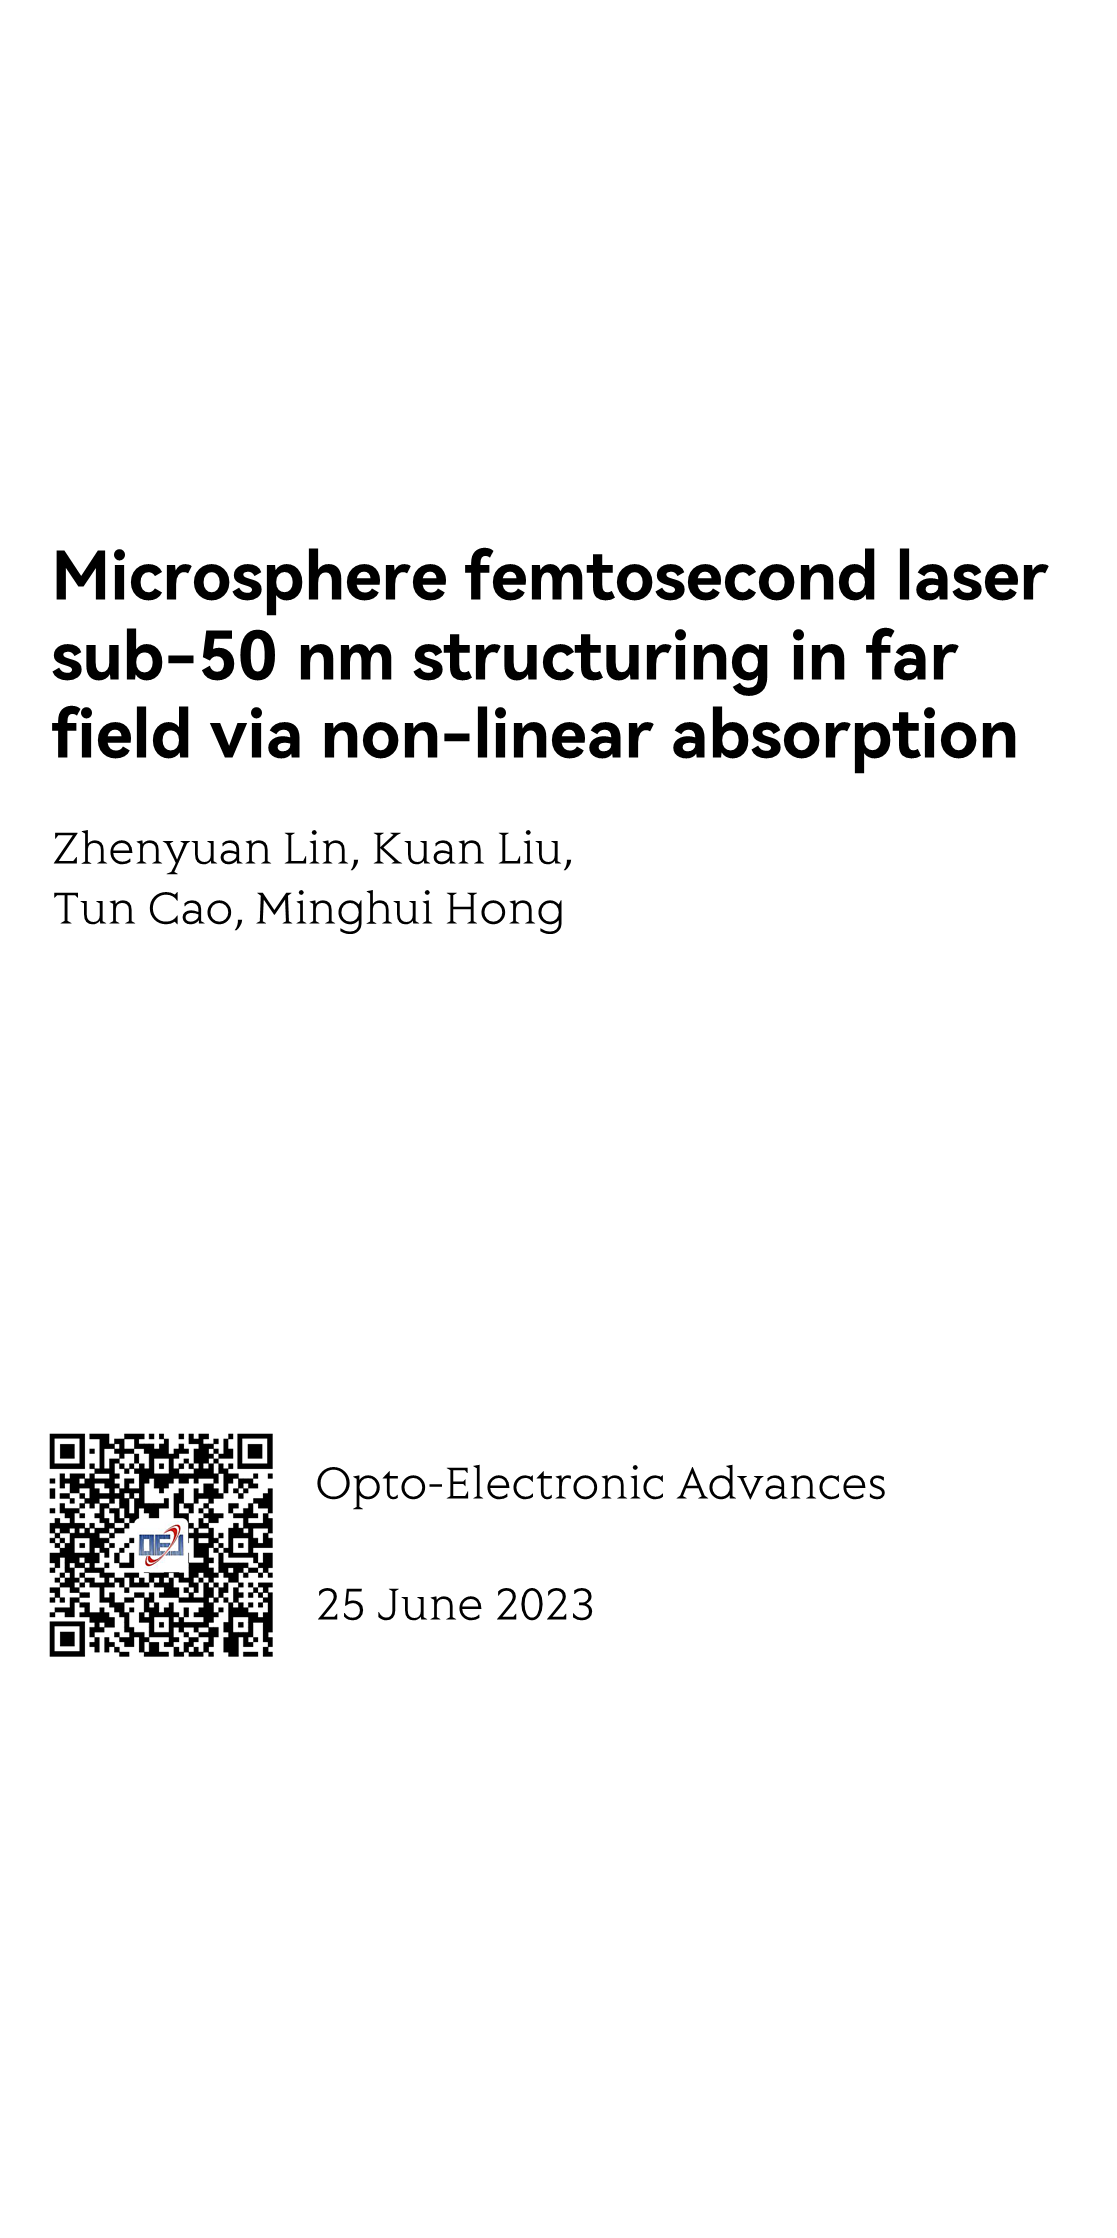 Microsphere femtosecond laser sub-50 nm structuring in far field via non-linear absorption_1